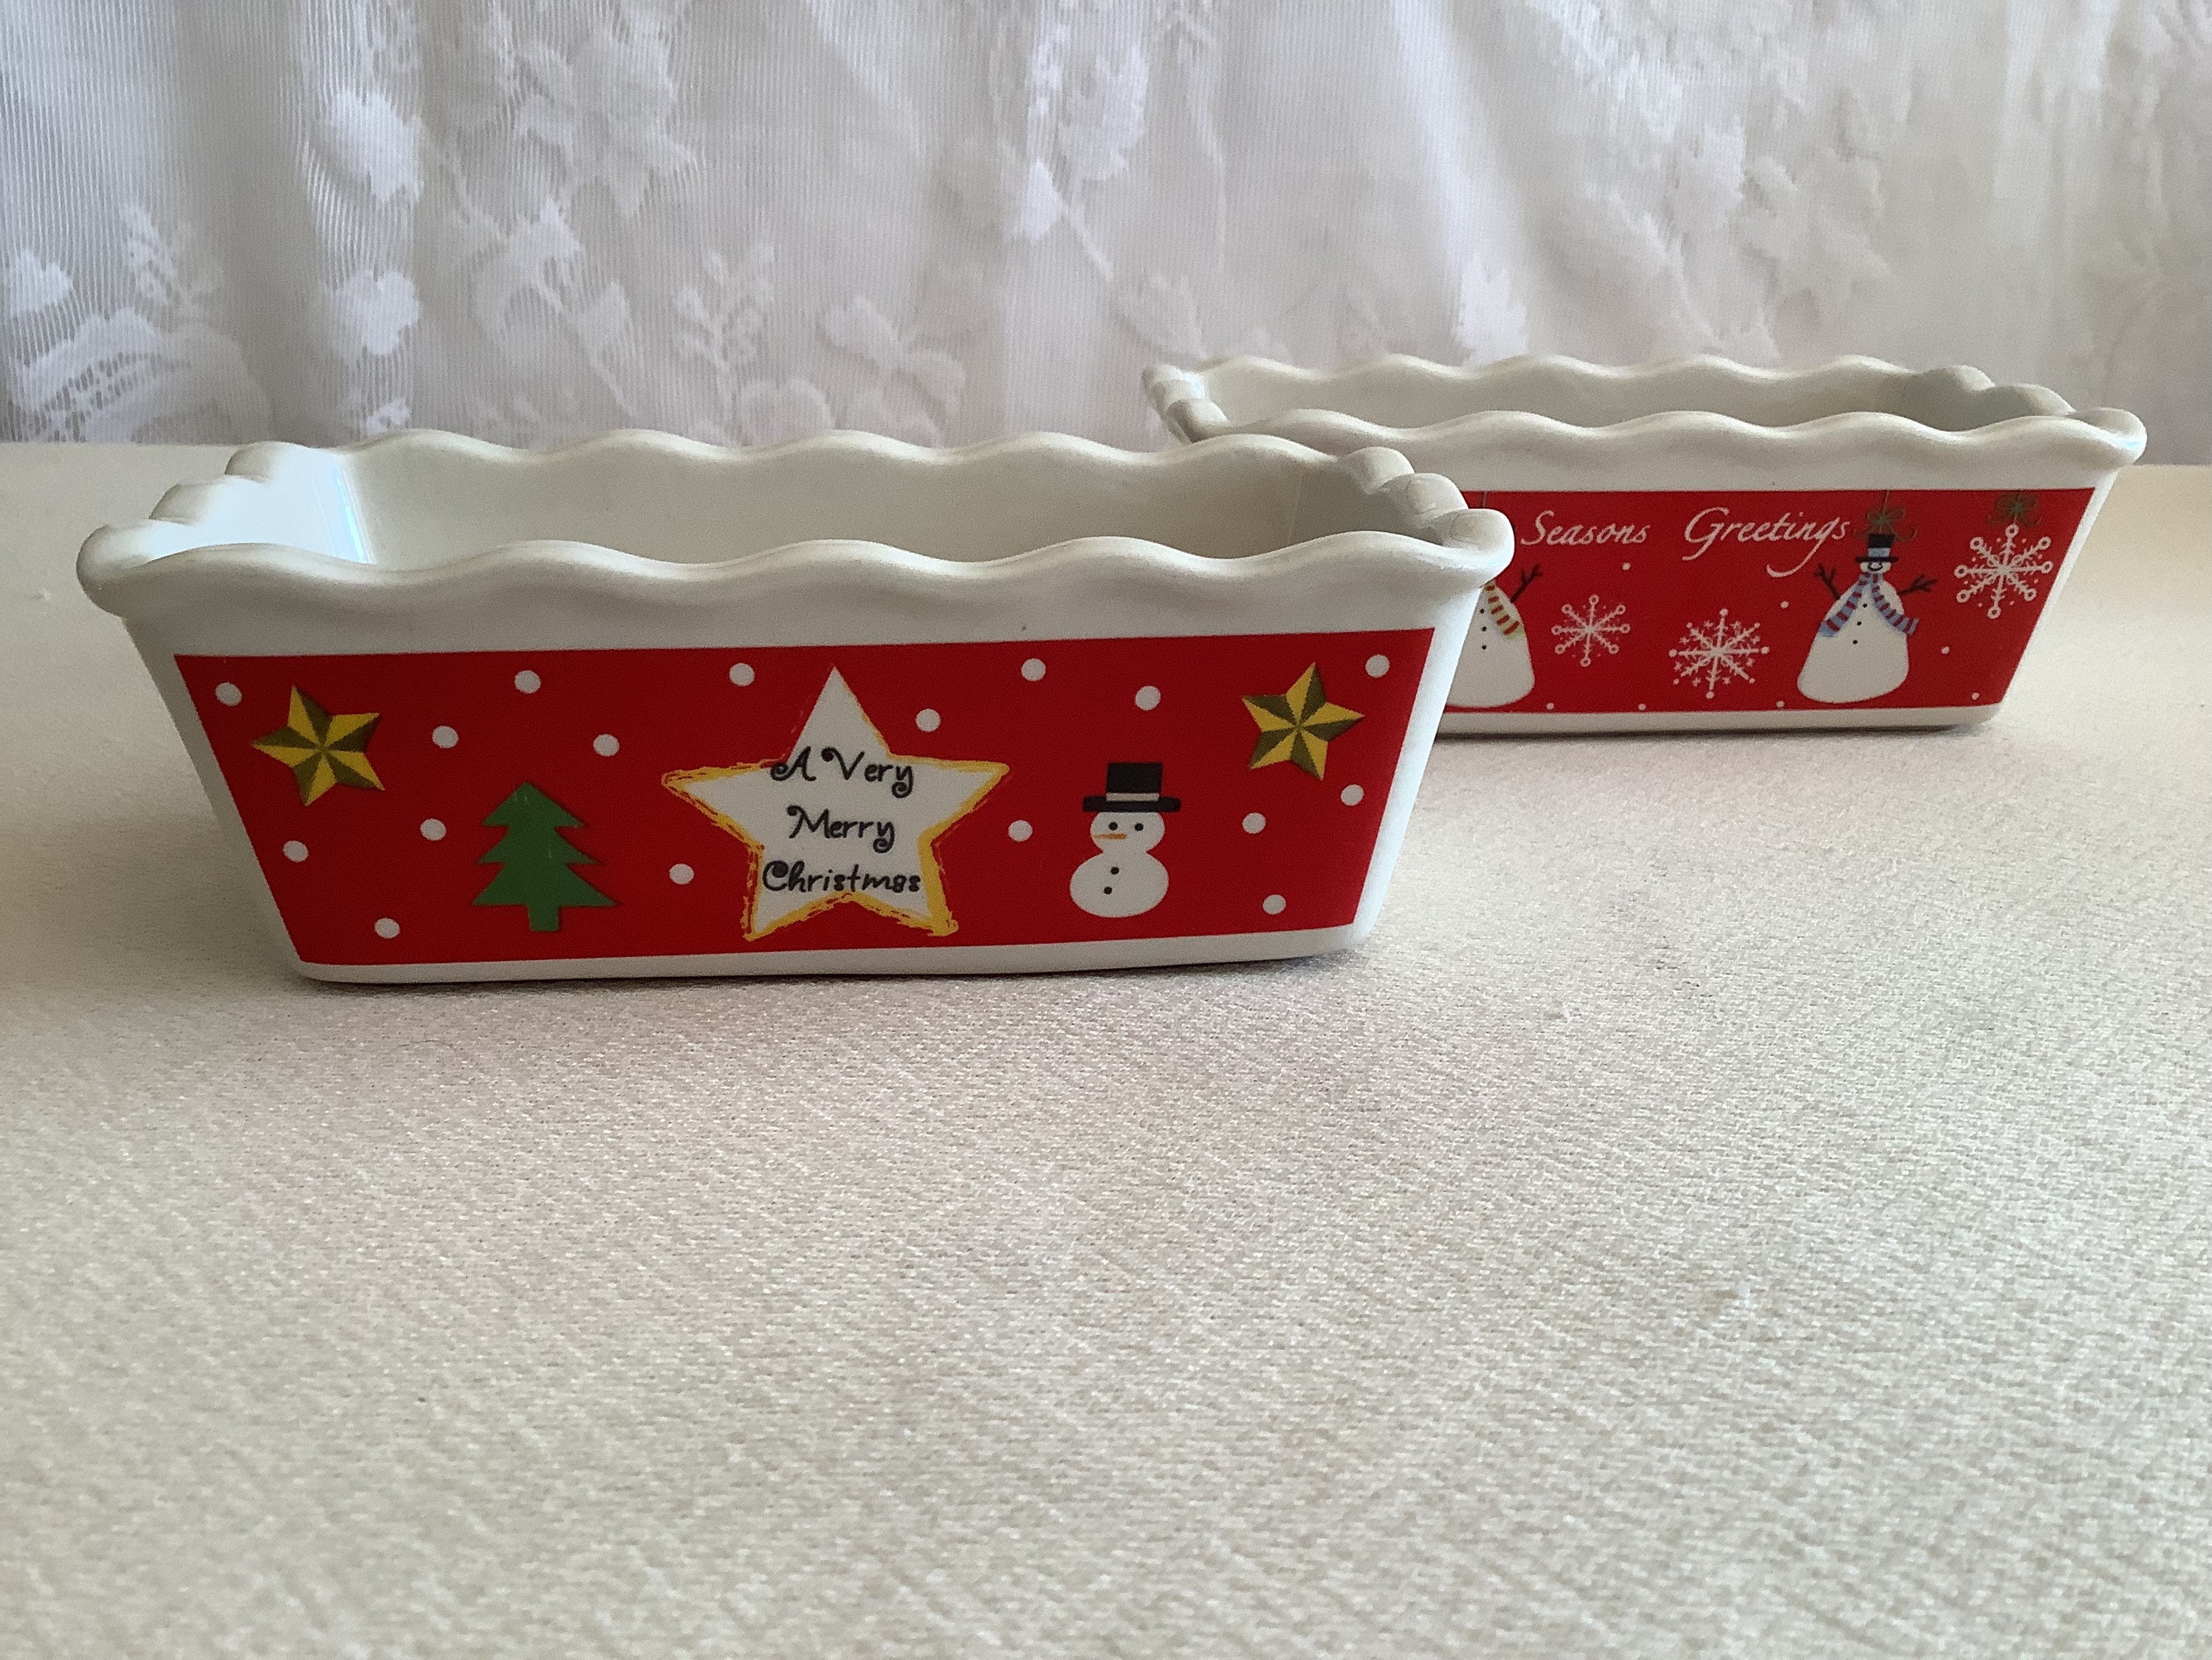 Christmas Loaf Pan Set of 2 Everyday Gibson Mini Bread 